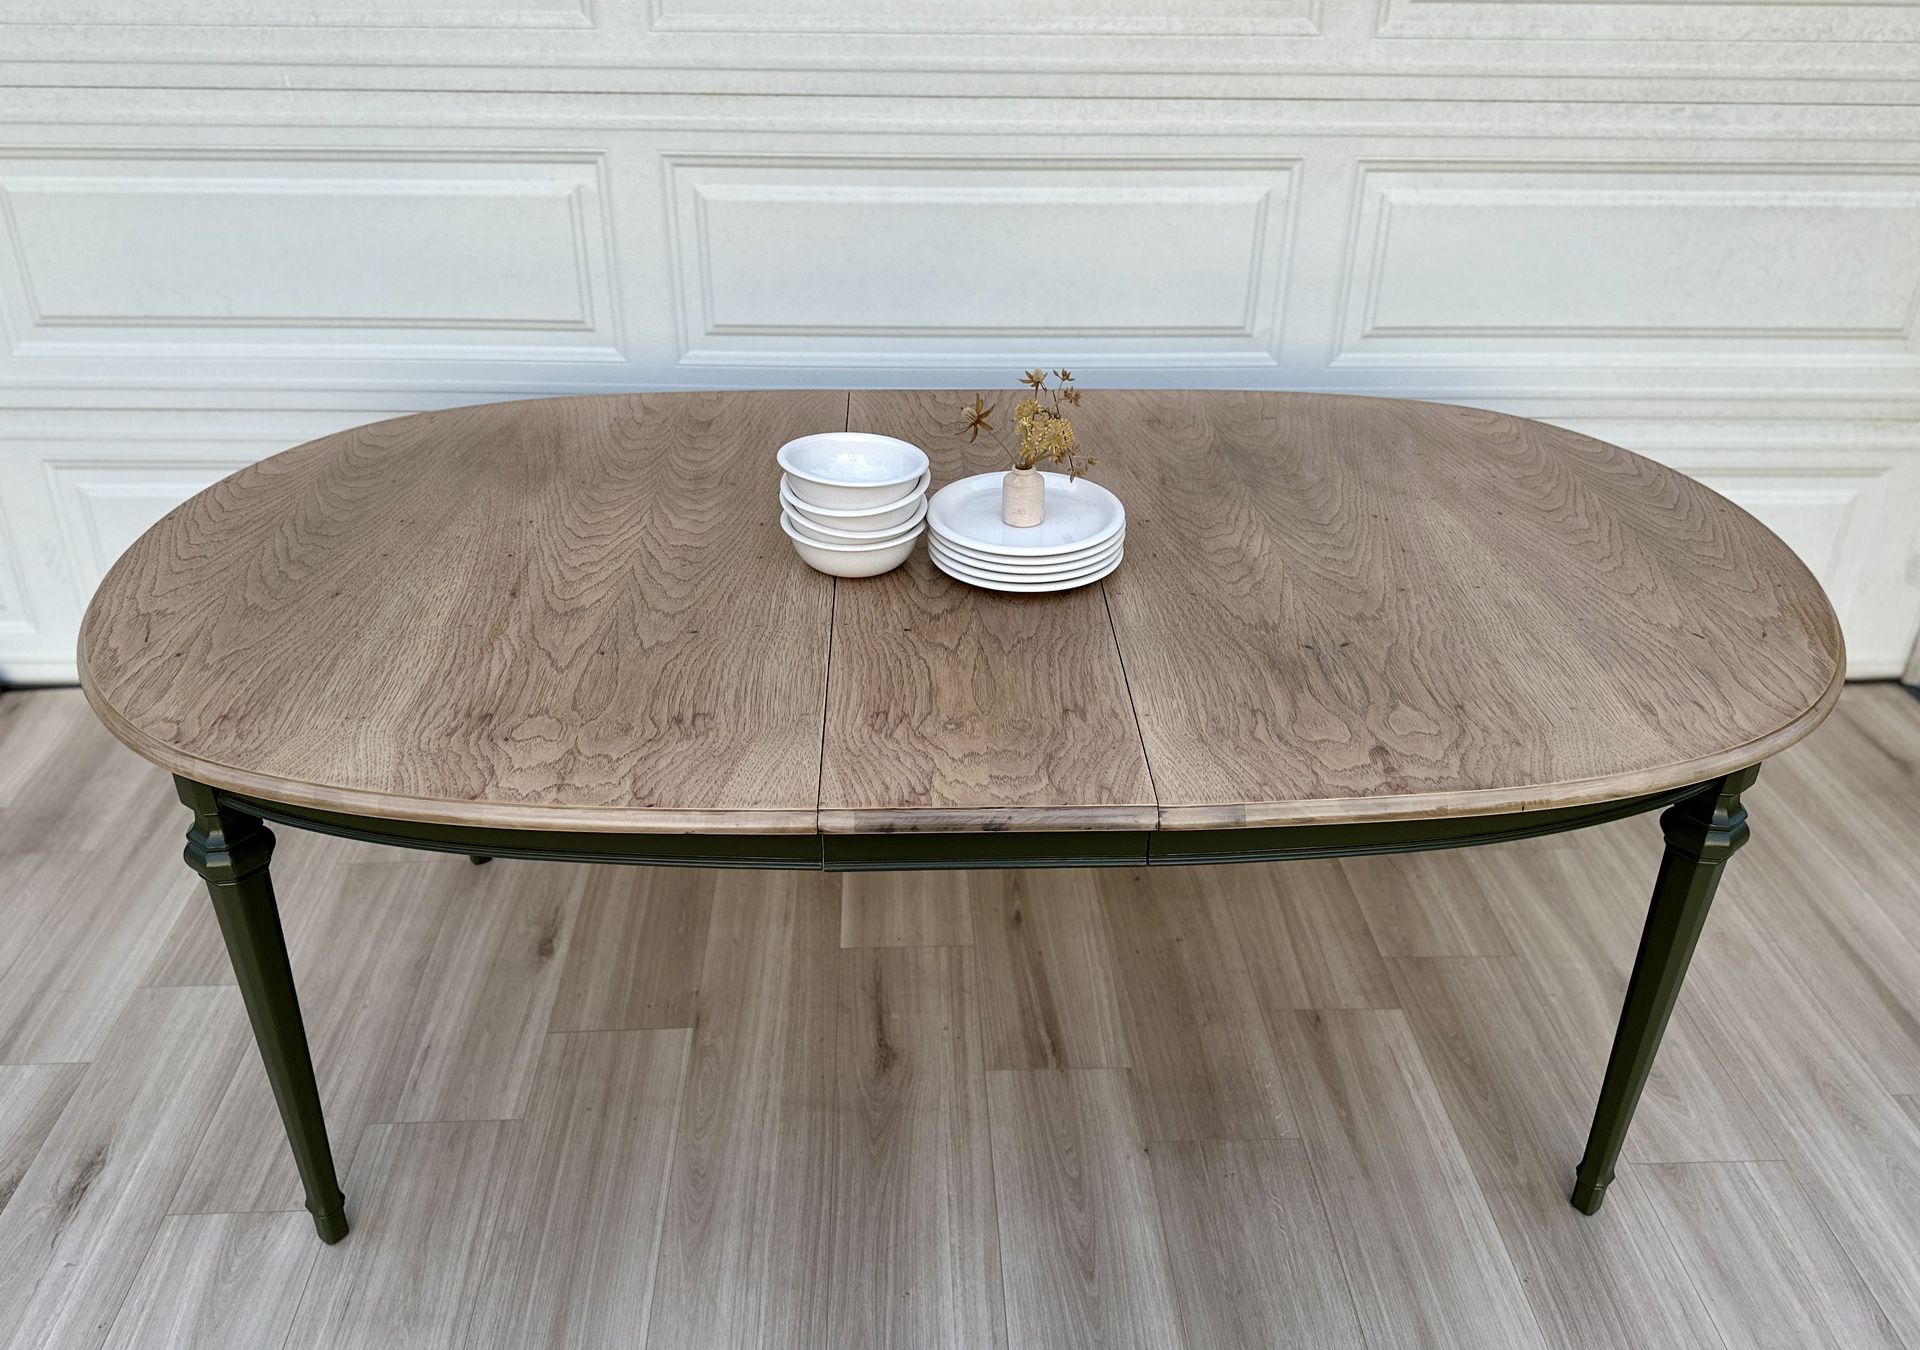 Vintage Pecan Dining Table - Extendable 